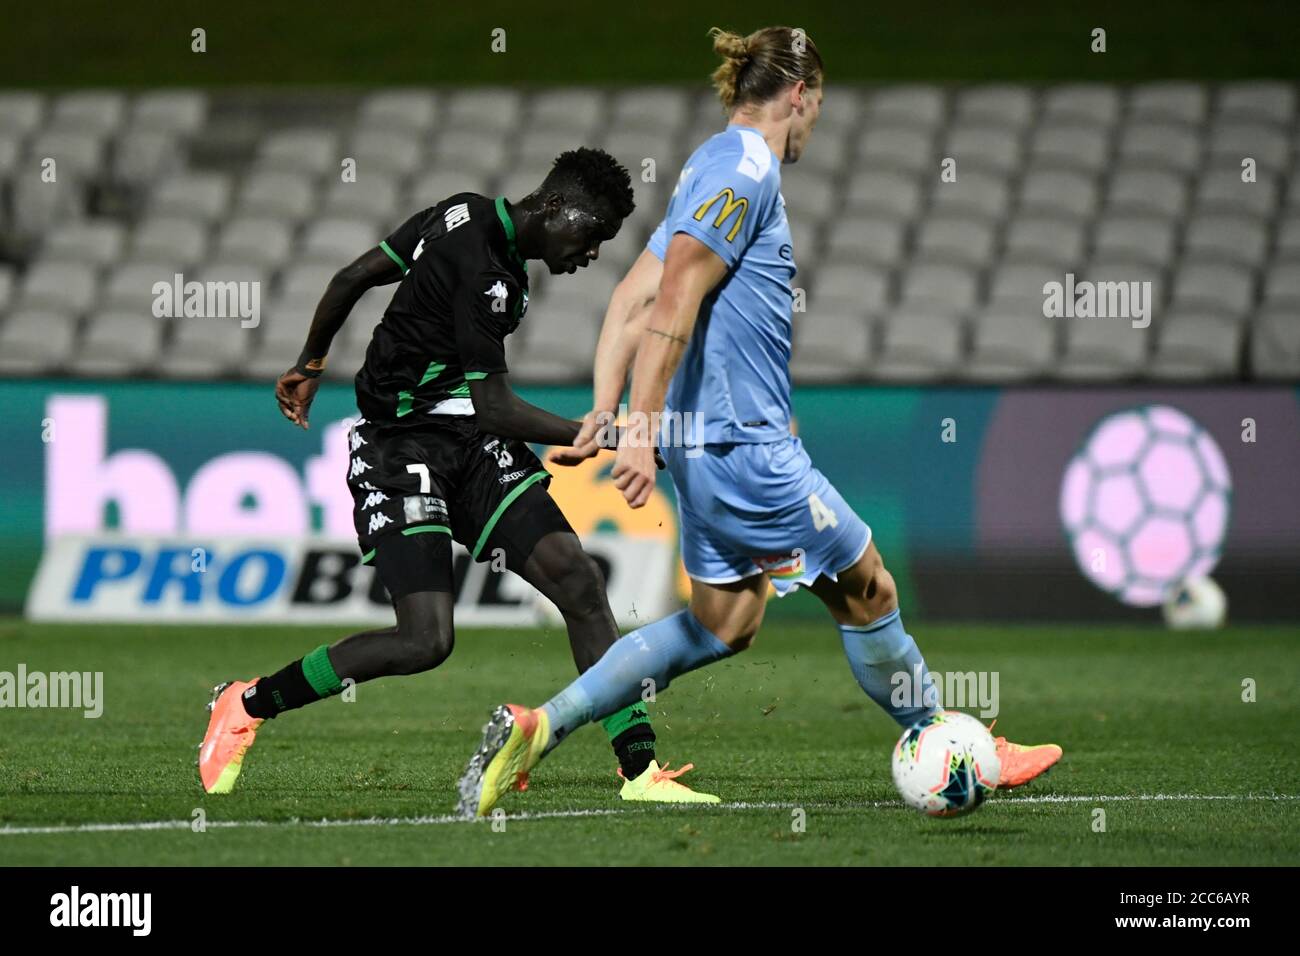 19th August 2020; Jubilee Oval, Sydney, New South Wales, Australia; A League Football, Western United FC versus Melbourne City FC; Kuach Yuel of Western Unite shoots as Harrison Delbridge of Melbourne City attempts to block the shot Stock Photo